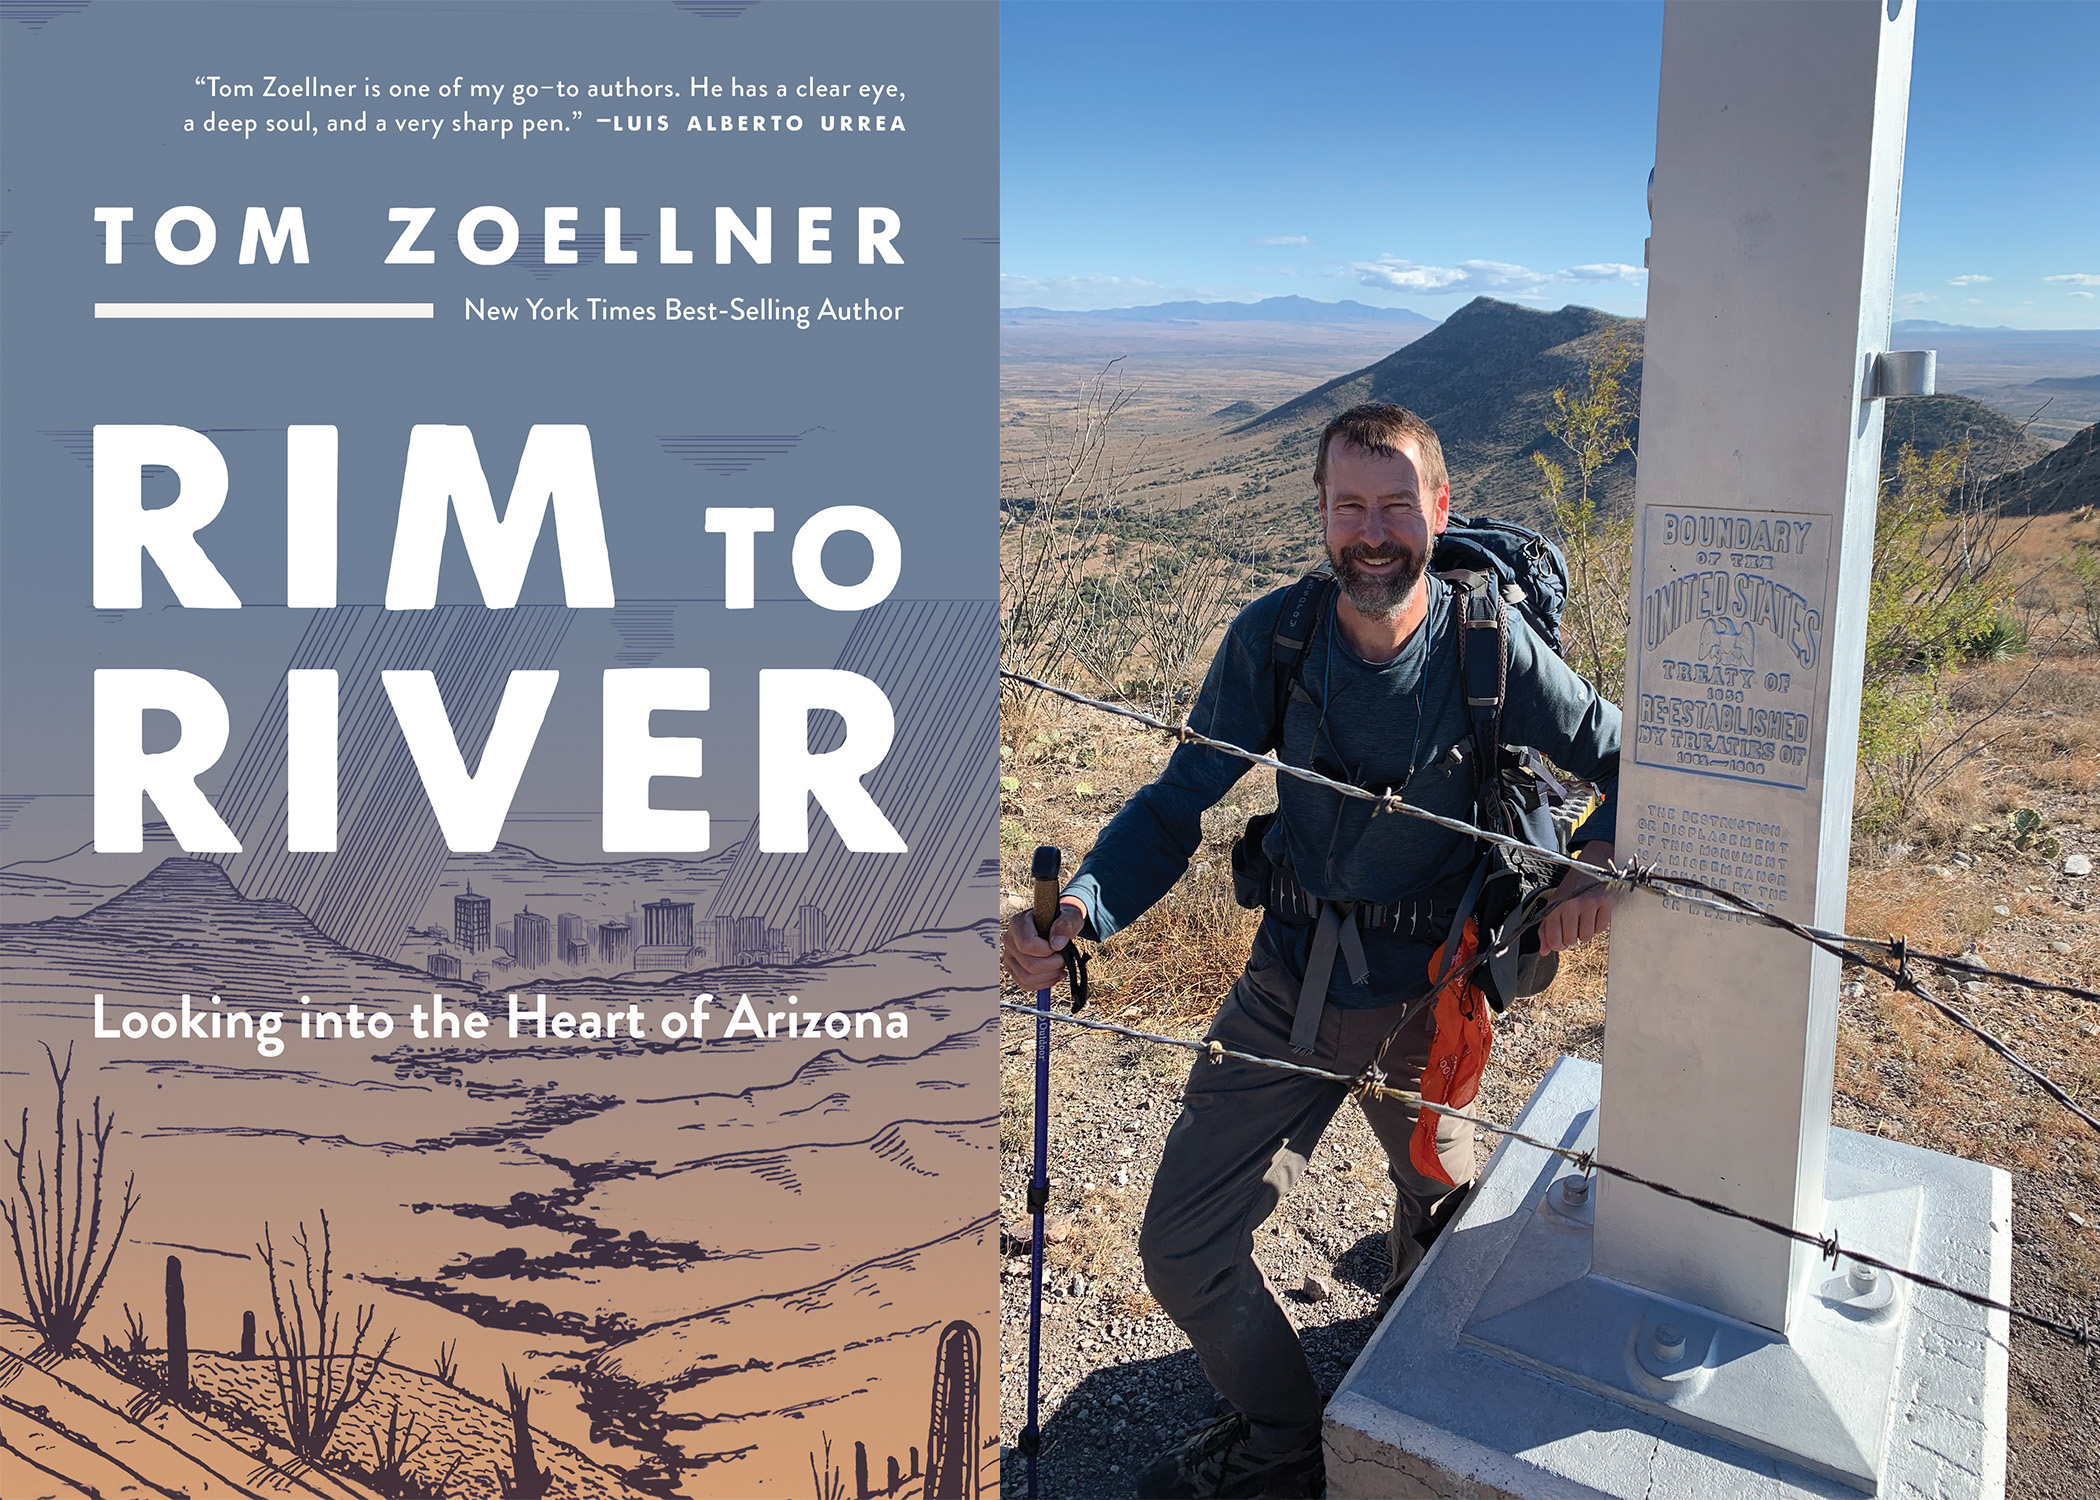 Rim To River book cover and Zoellner photo